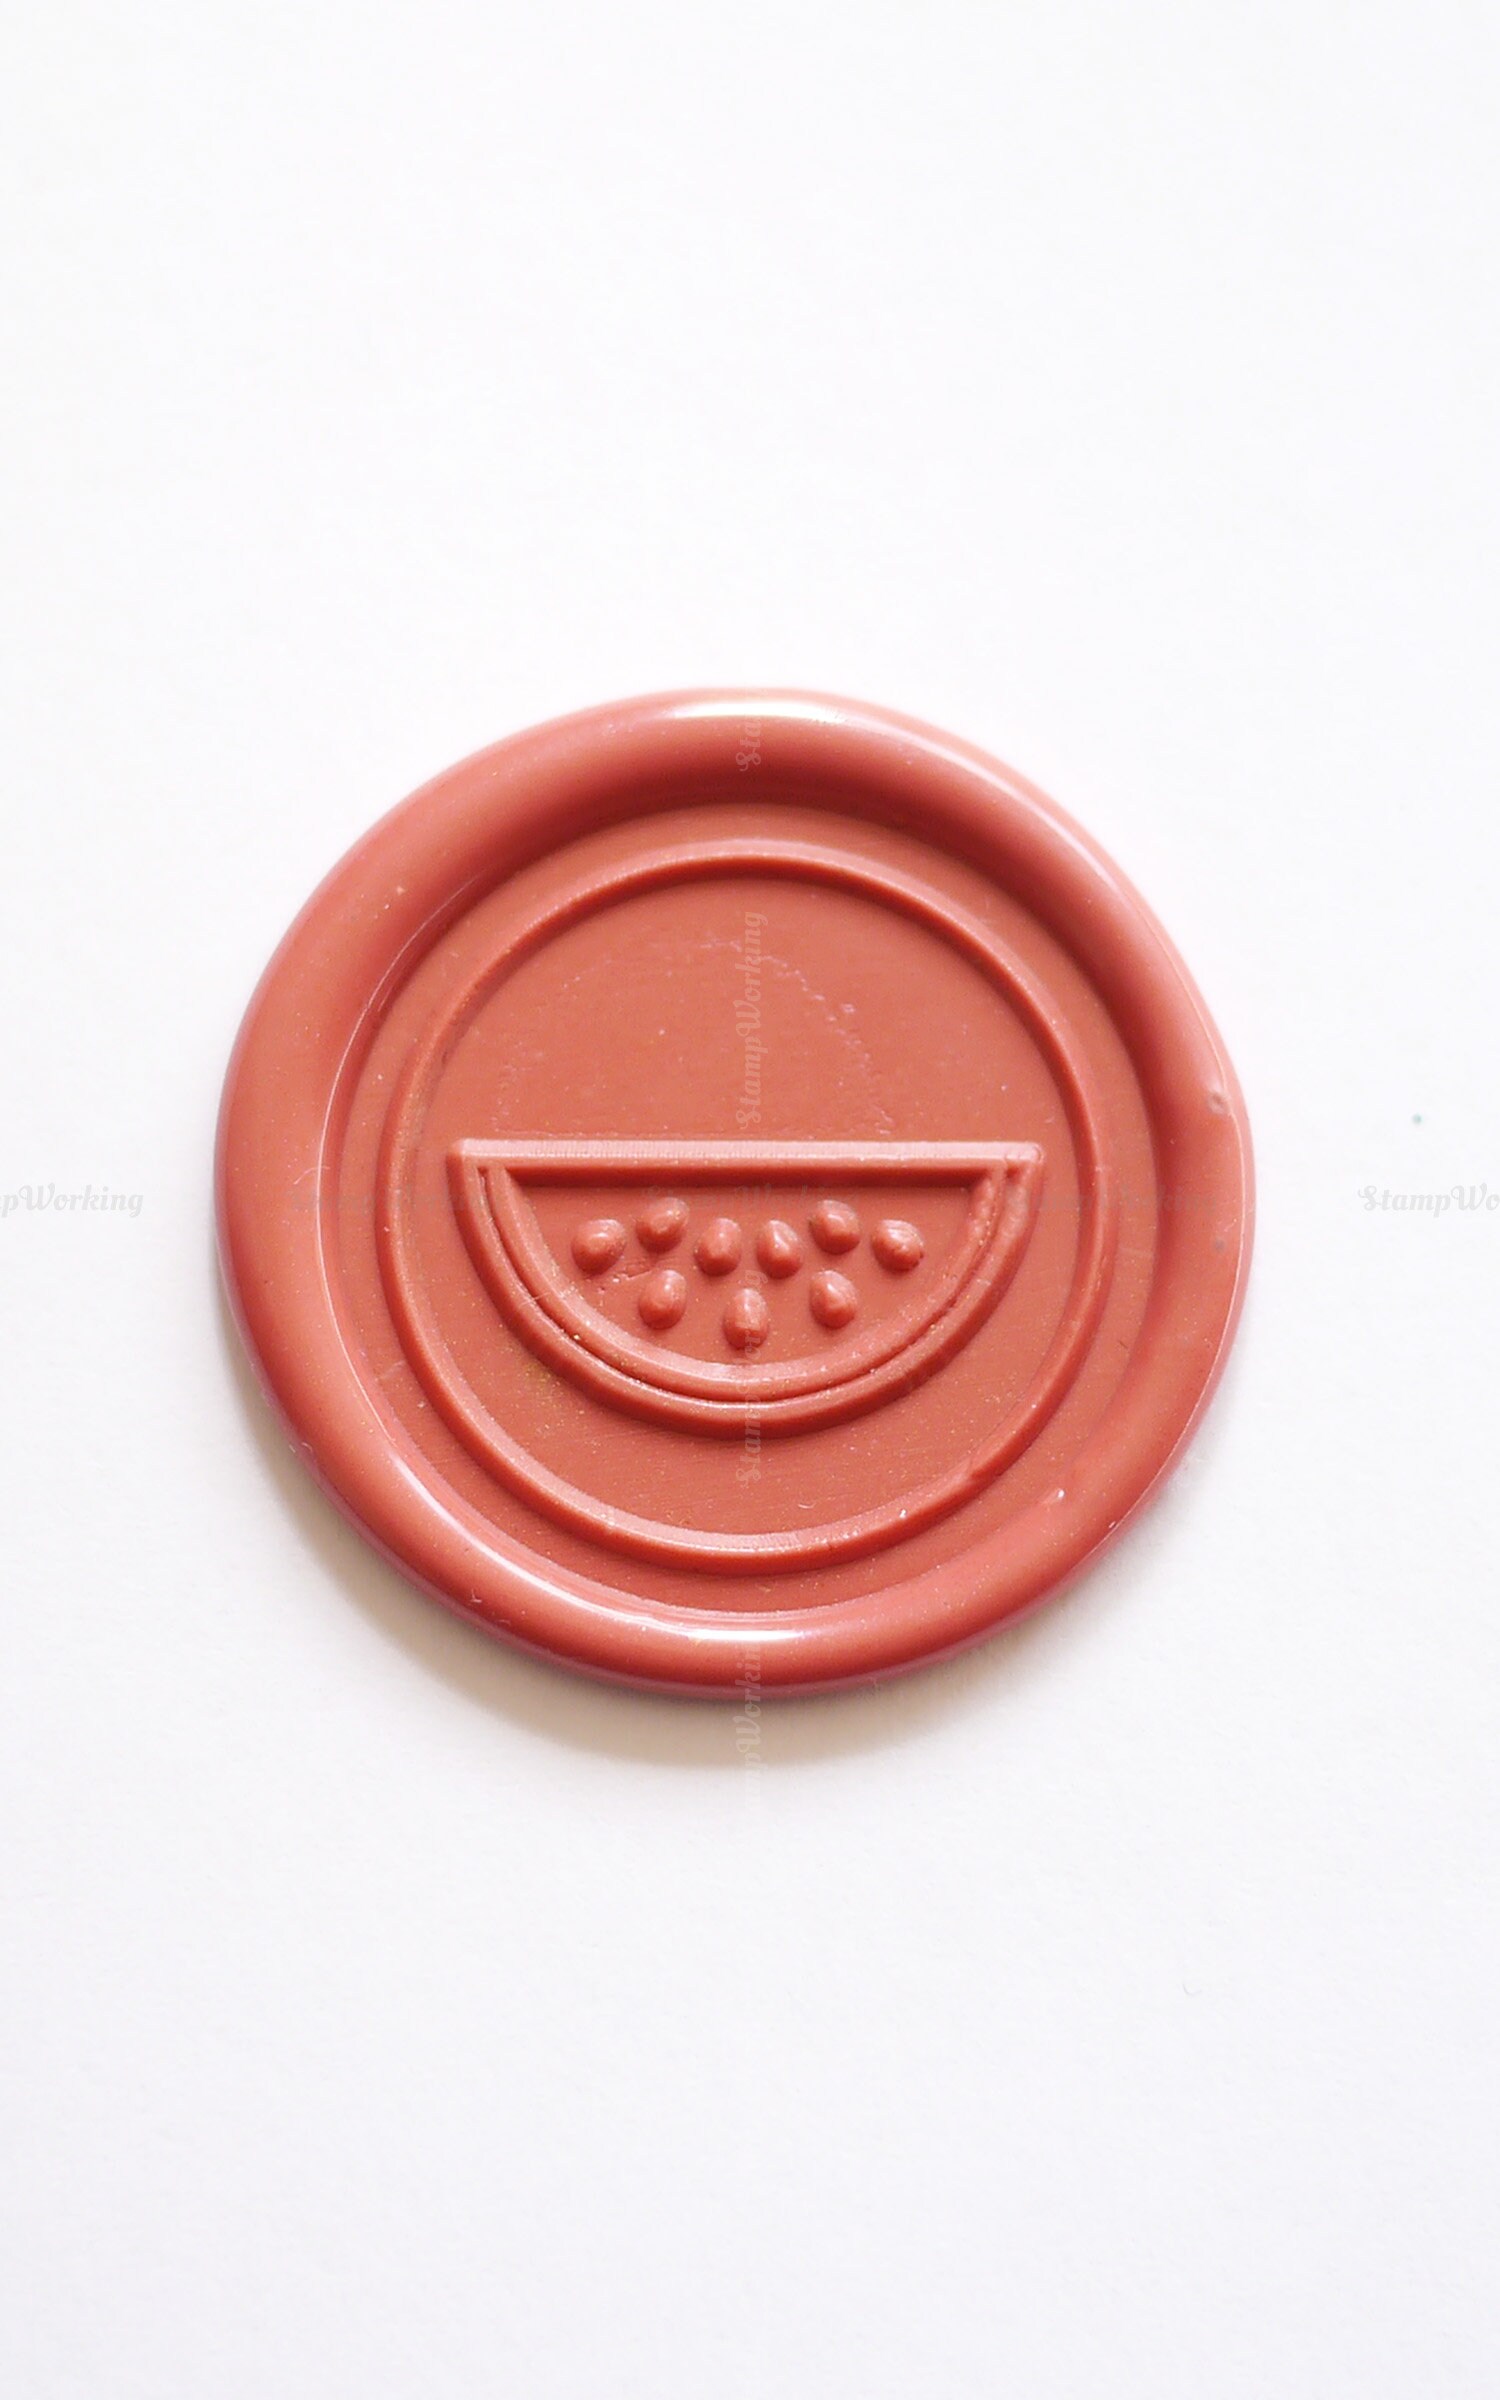 Custom Initial With Leaves Wax Seal Stamp Personalized Wax Seal Stamp  Initial Wax Stamp Wax Seal Stamp Kit Leaves Wreath Stamp 